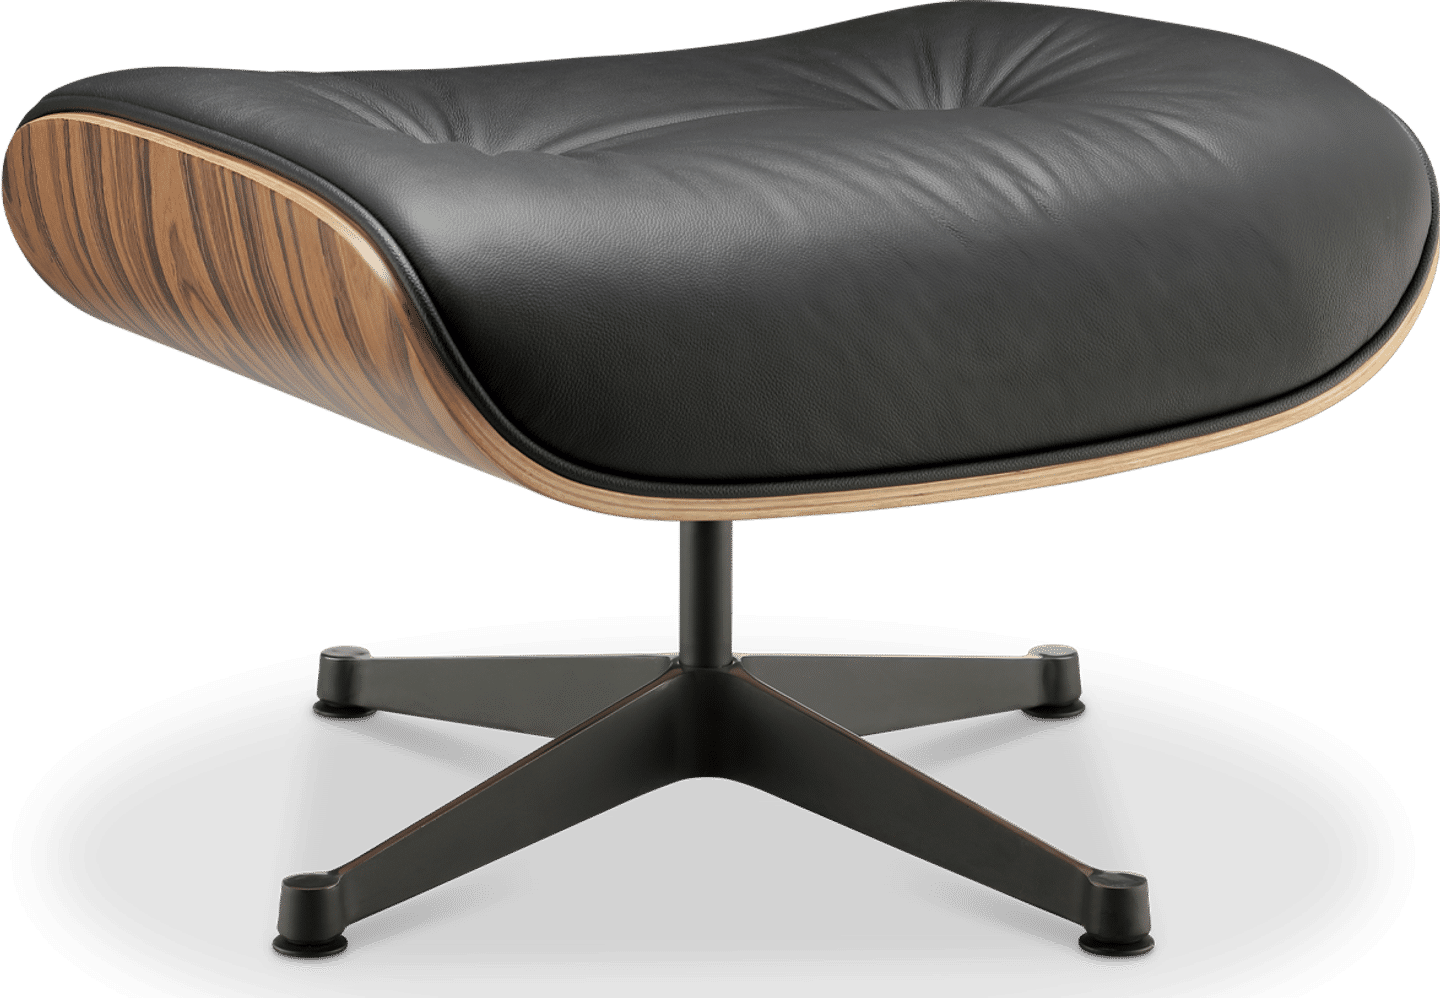 Eames Style Lounge Chair 670 Hocker Italian Leather/Black/Rosewood image.